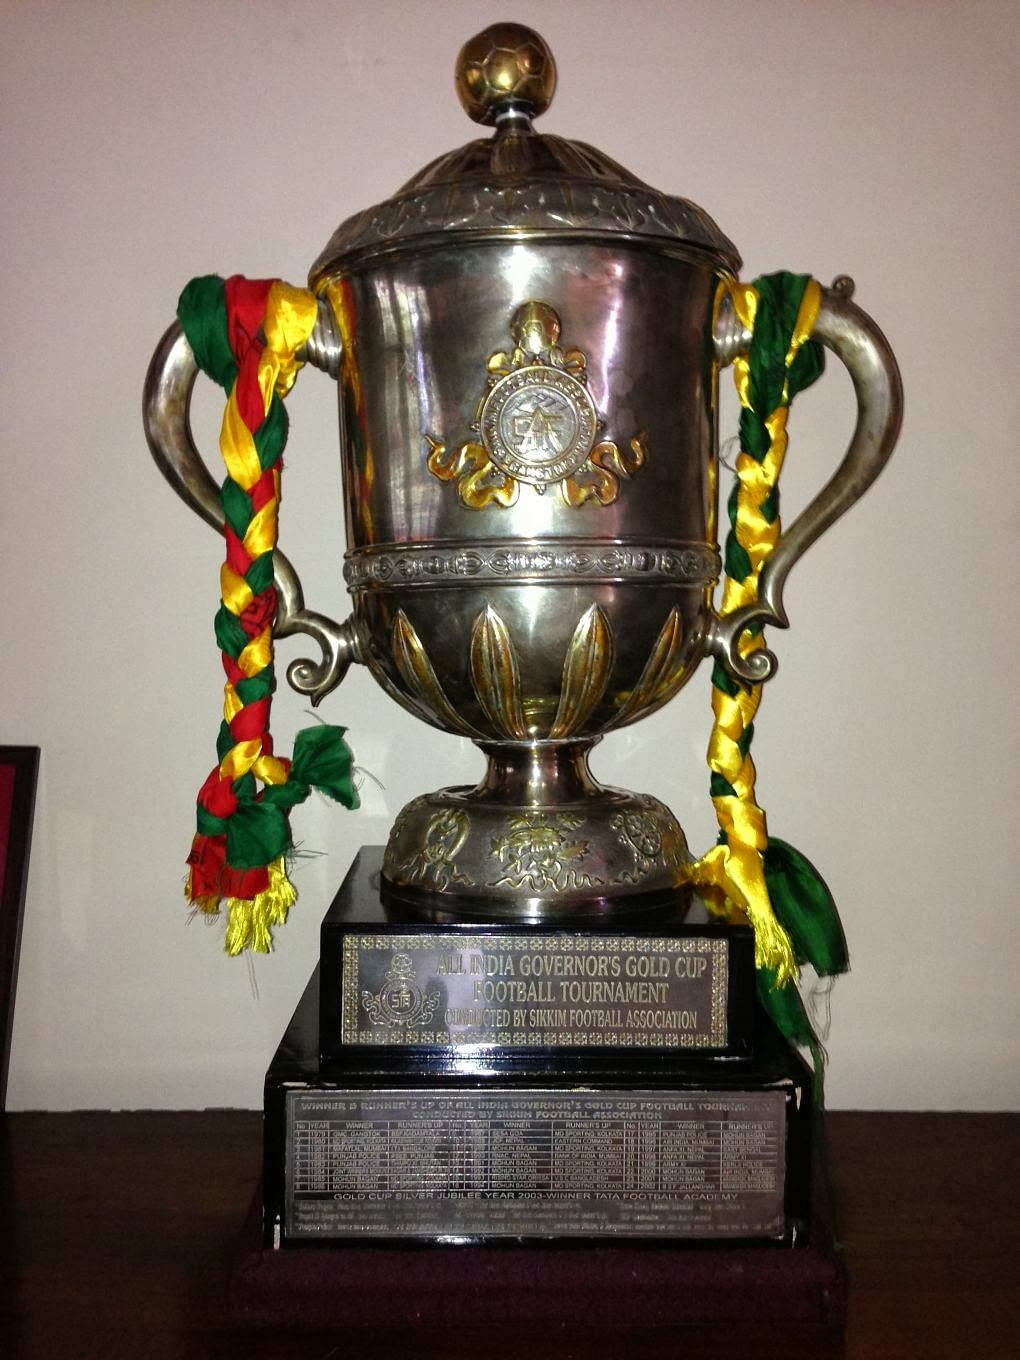 Sikkim Governors Gold Cup